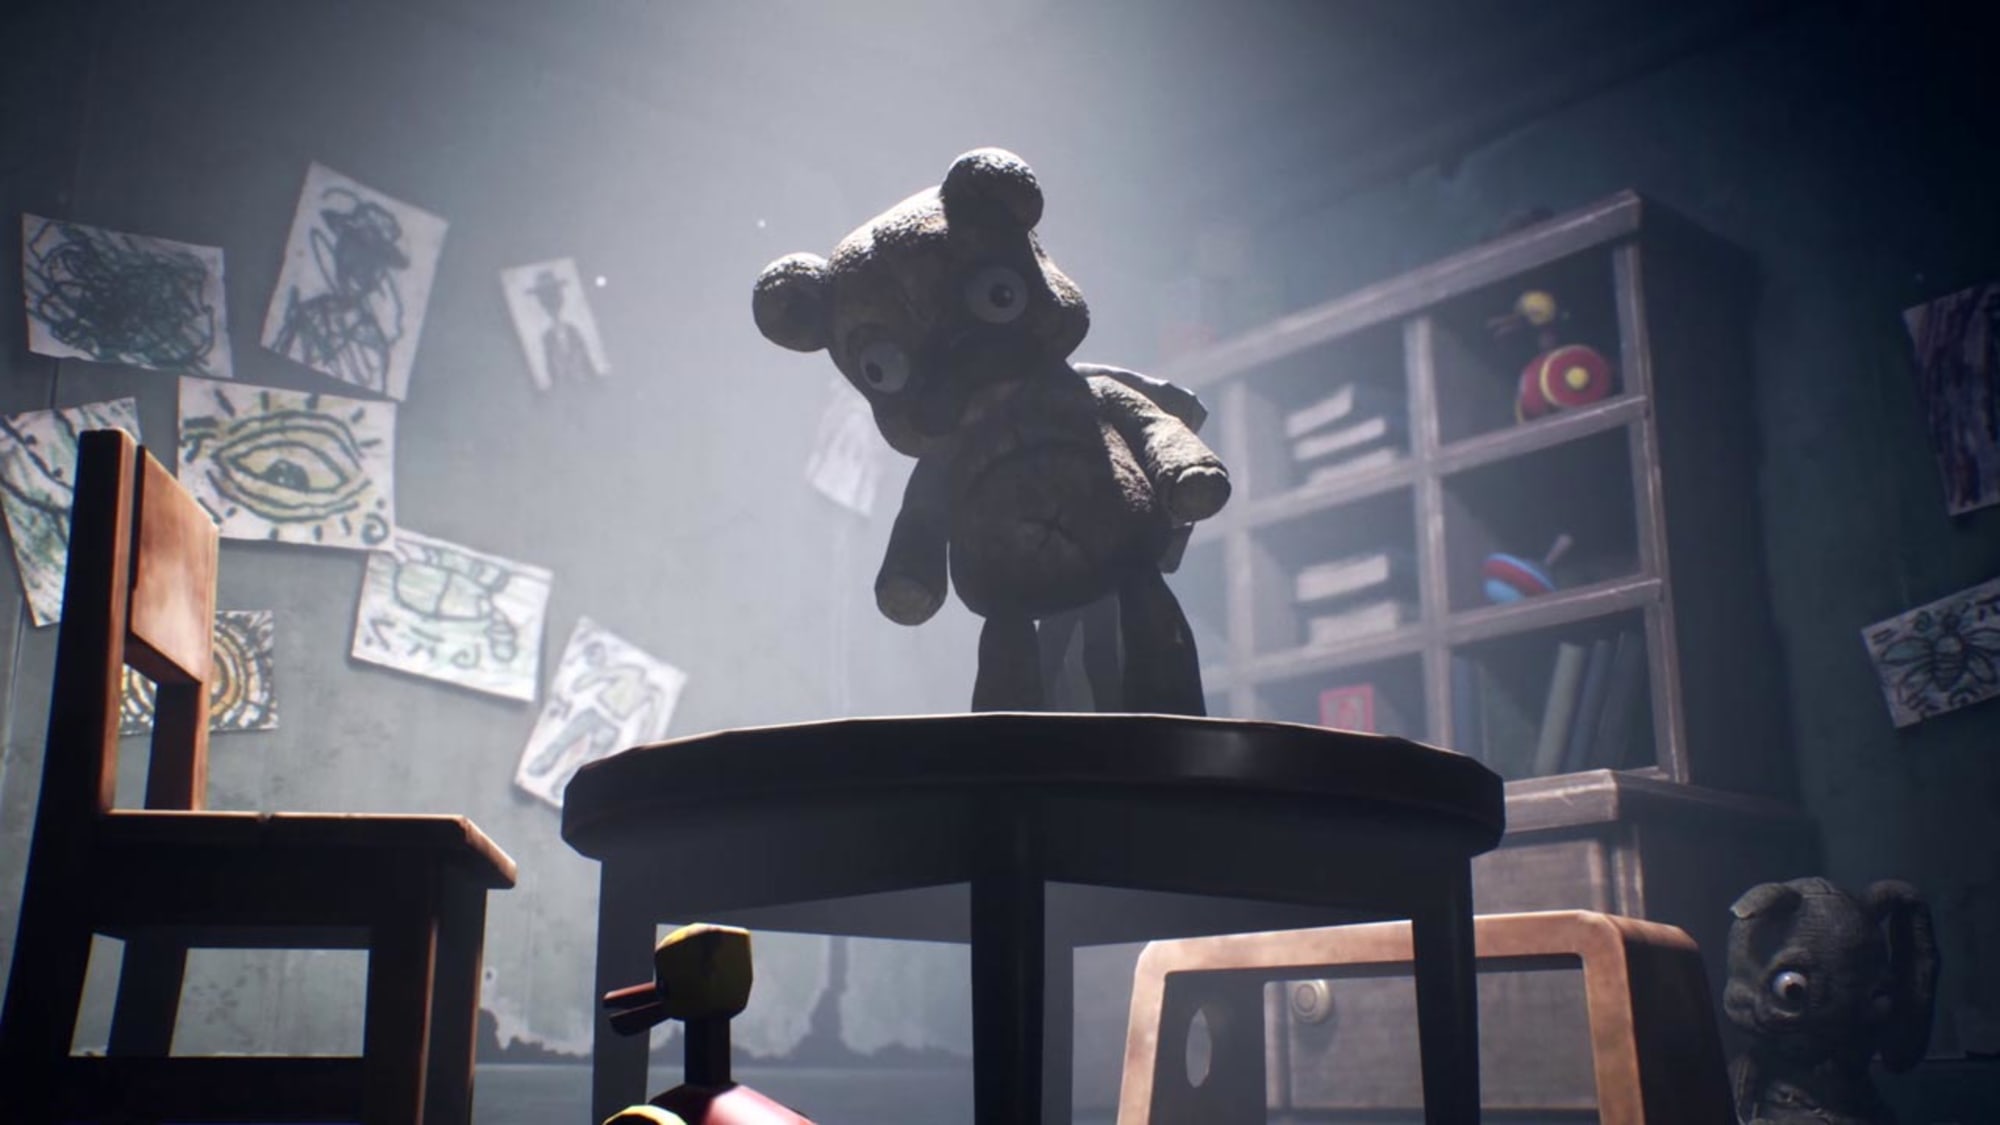 Little Nightmares 2 Gameplay Features Co-op Puzzle Solving, The Hunter